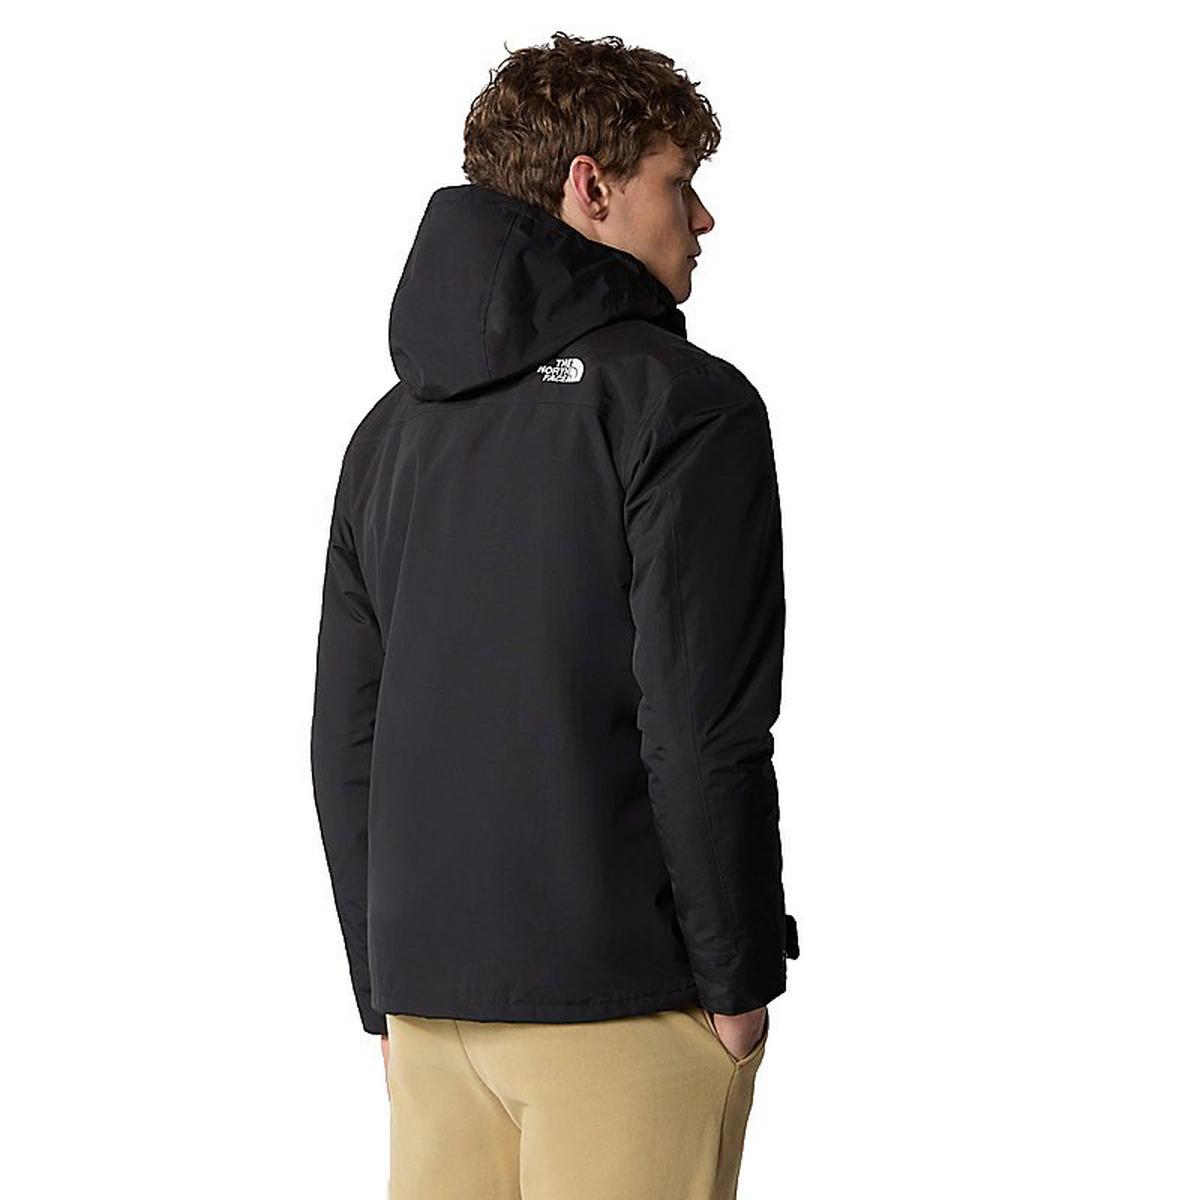 The North Face Men's Pinecroft Triclimate Jacket - Black